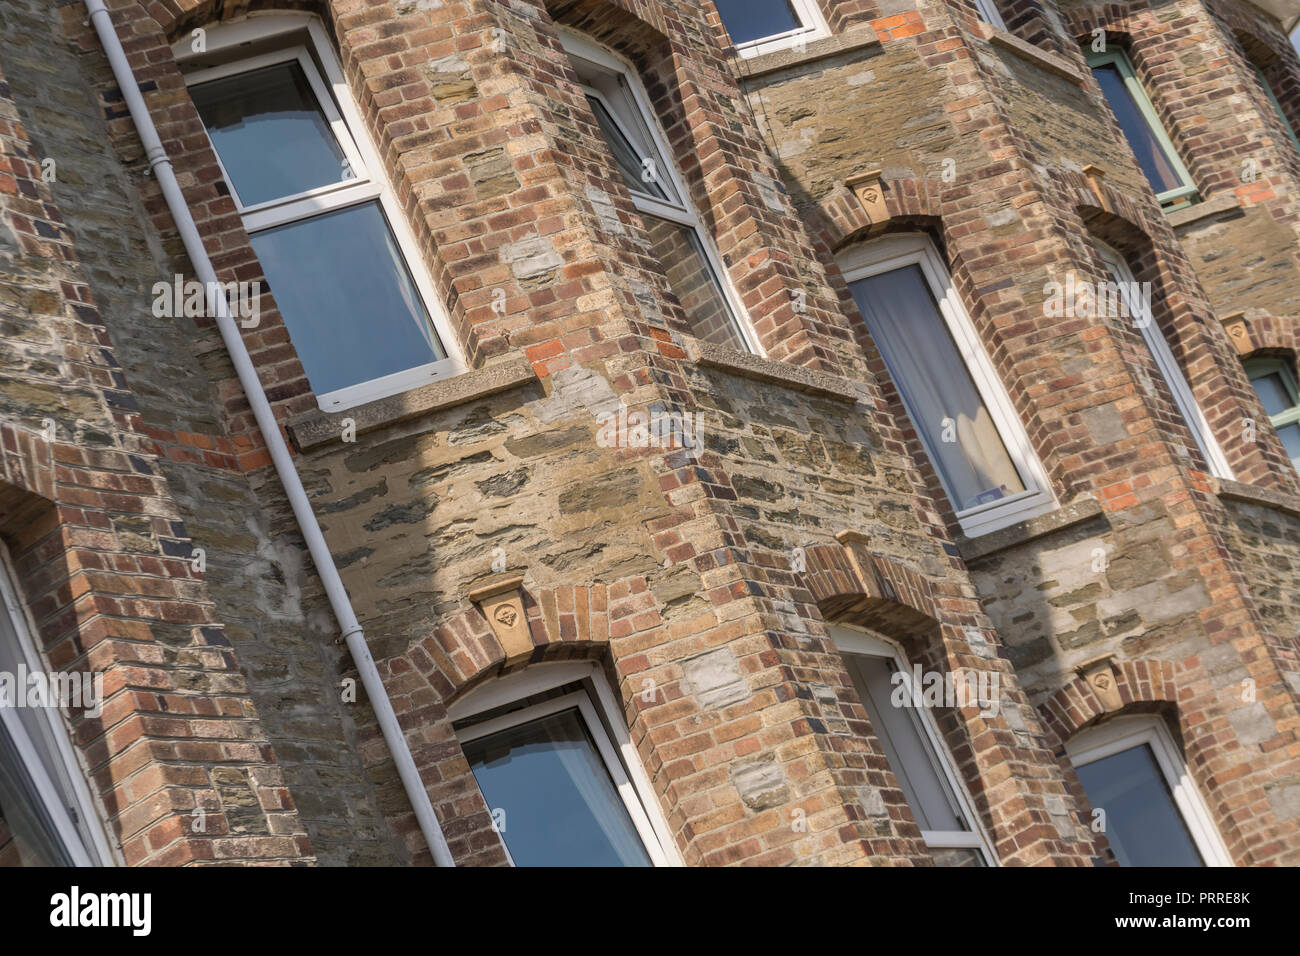 Rear part of block of flats in Newquay, Cornwall. For generation rent', getting on the housing ladder, rent concept, UK house rental, home ownership. Stock Photo